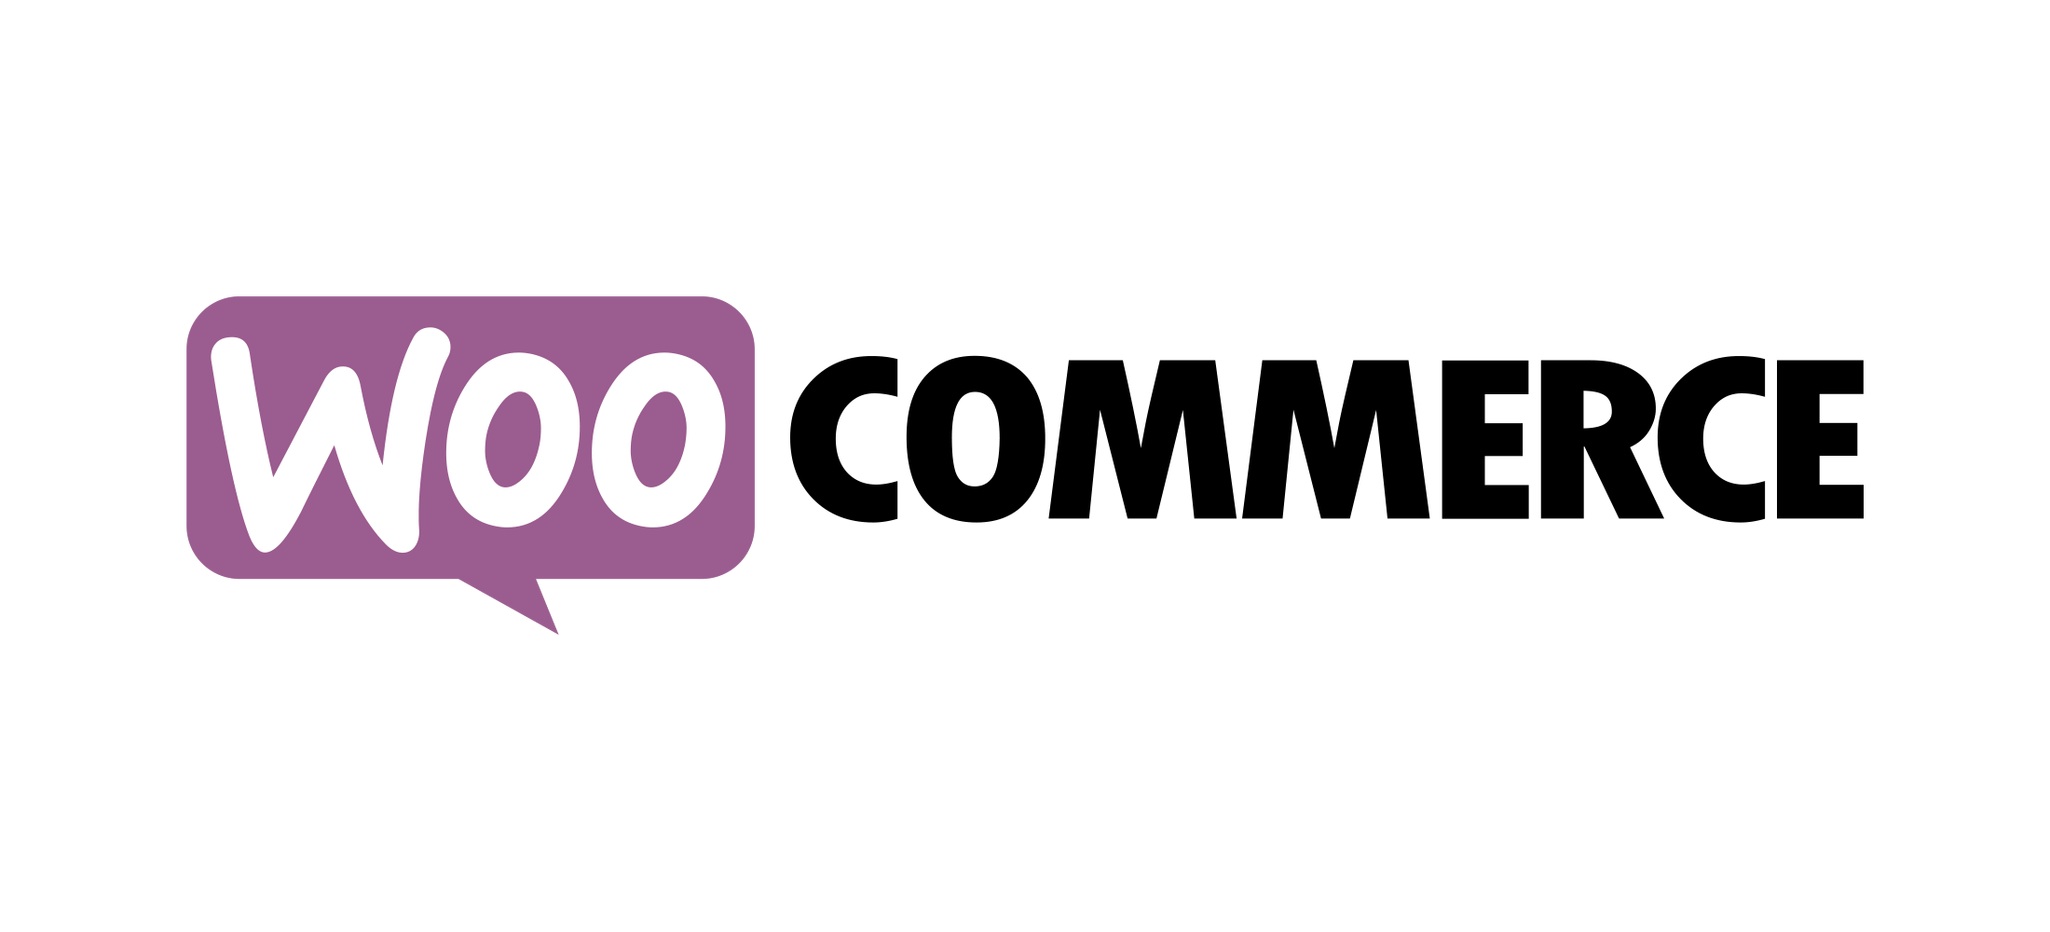 WooCommerce 3.6 RC2 Removes Marketplace Suggestions from Product Listing, Adds Setting to Turn them Off